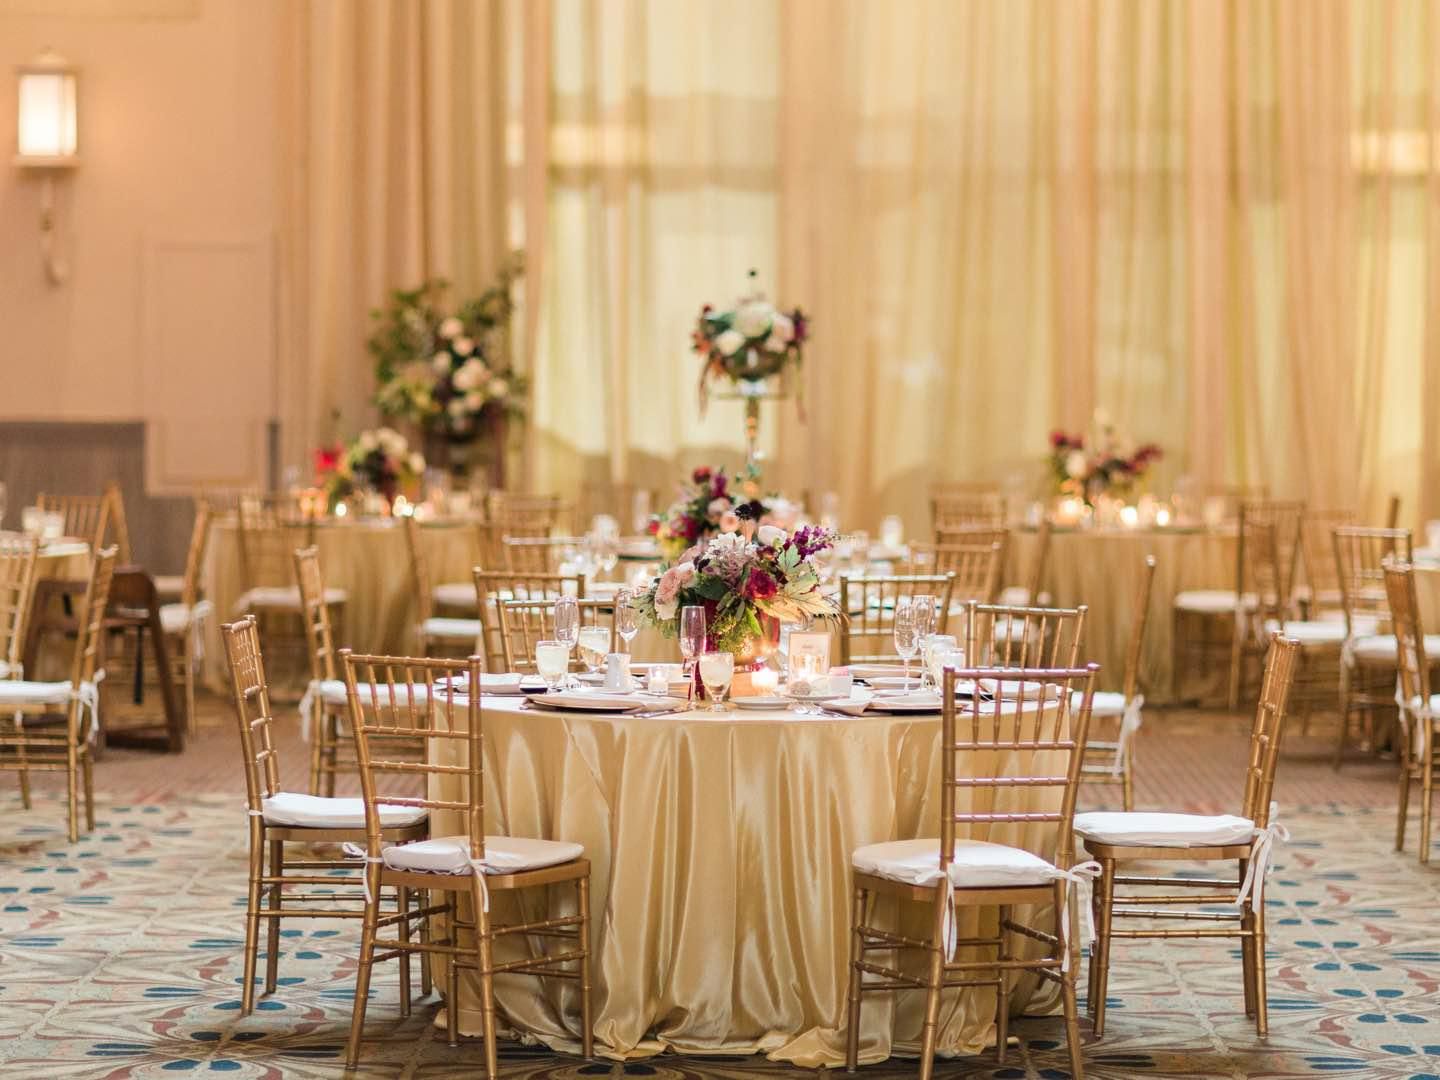 With breathtaking venues and impeccable service, weddings at Crowne Plaza Indianapolis Downtown set a new standard in romantic elegance. Our Grand Hall, America's First Union Station, offers  a  palatial and unique venue steeped with history.